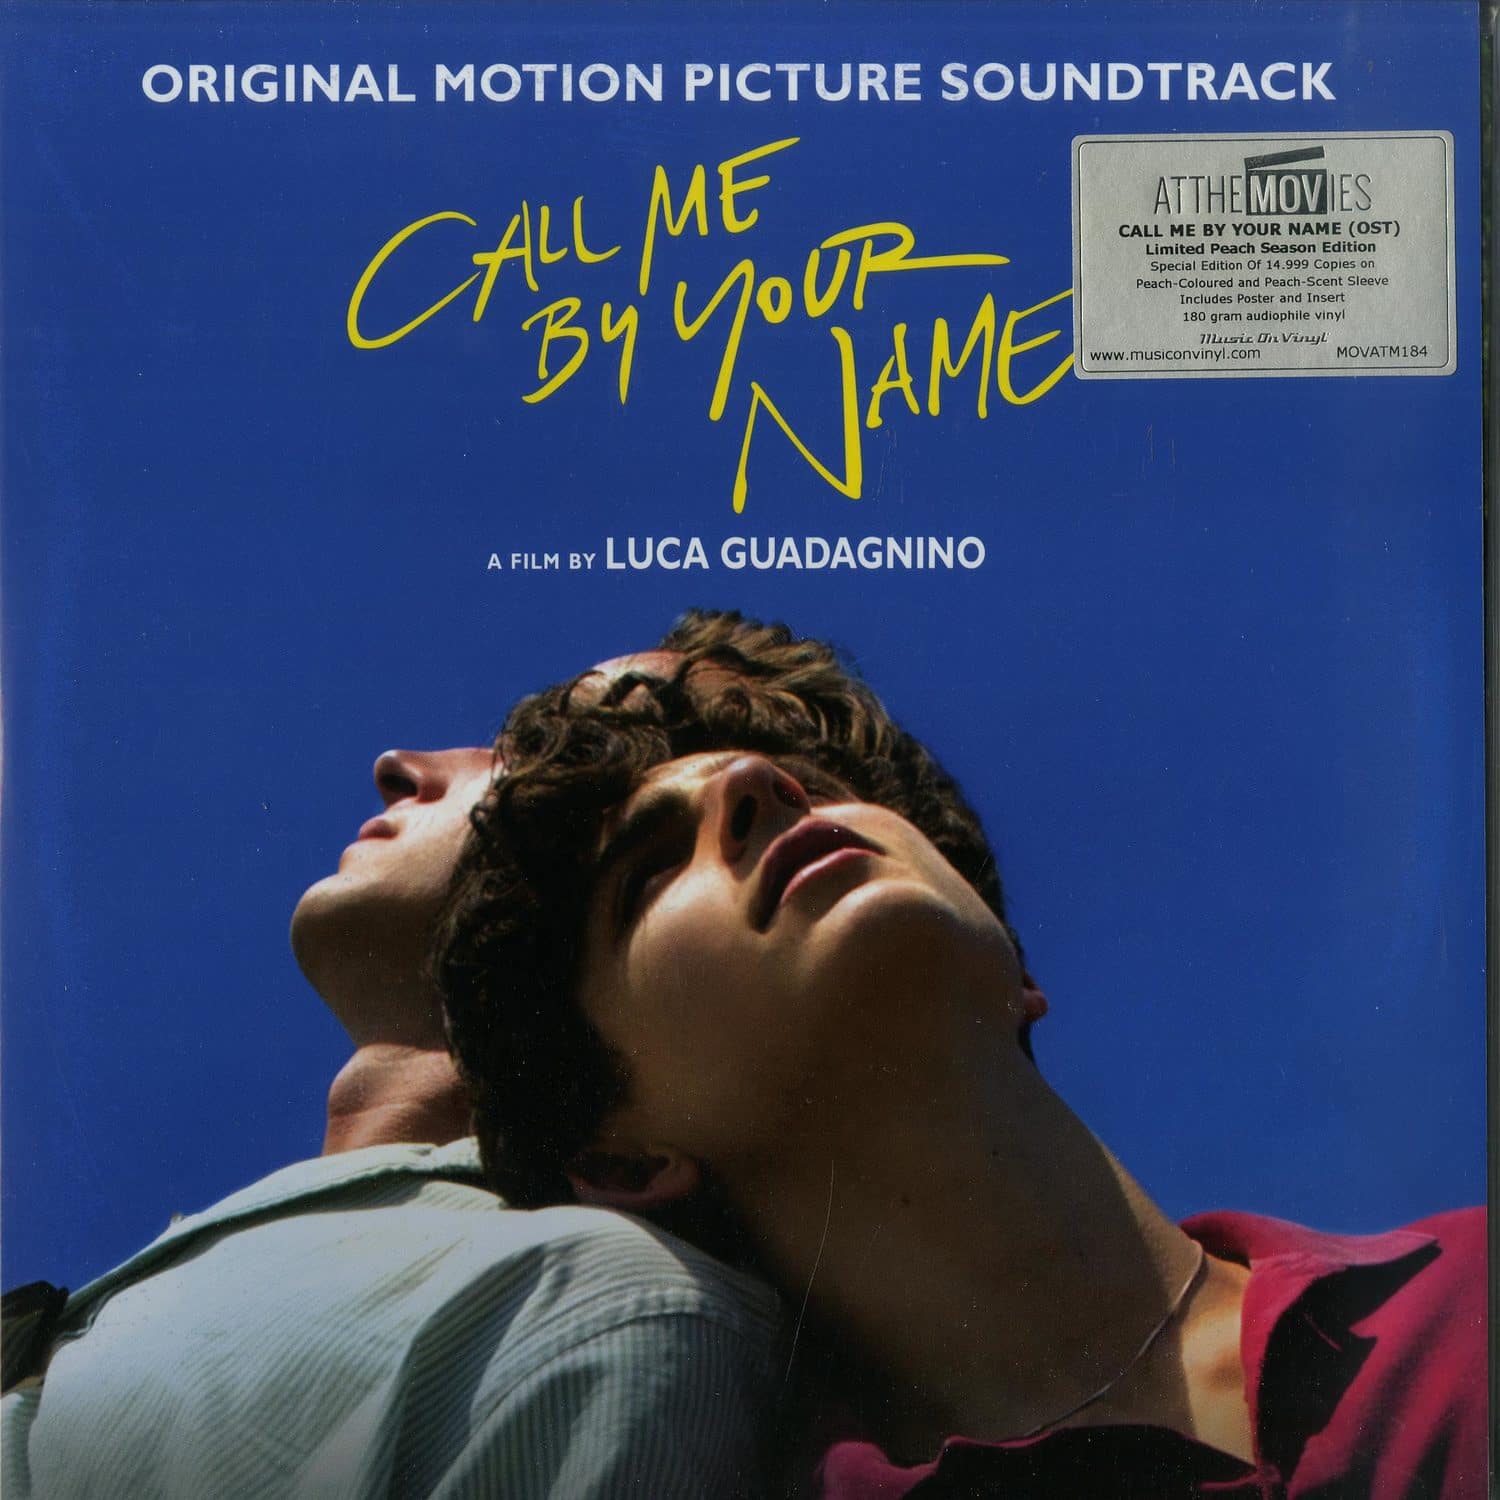 Various Artists - CALL ME BY YOUR NAME O.S.T. 